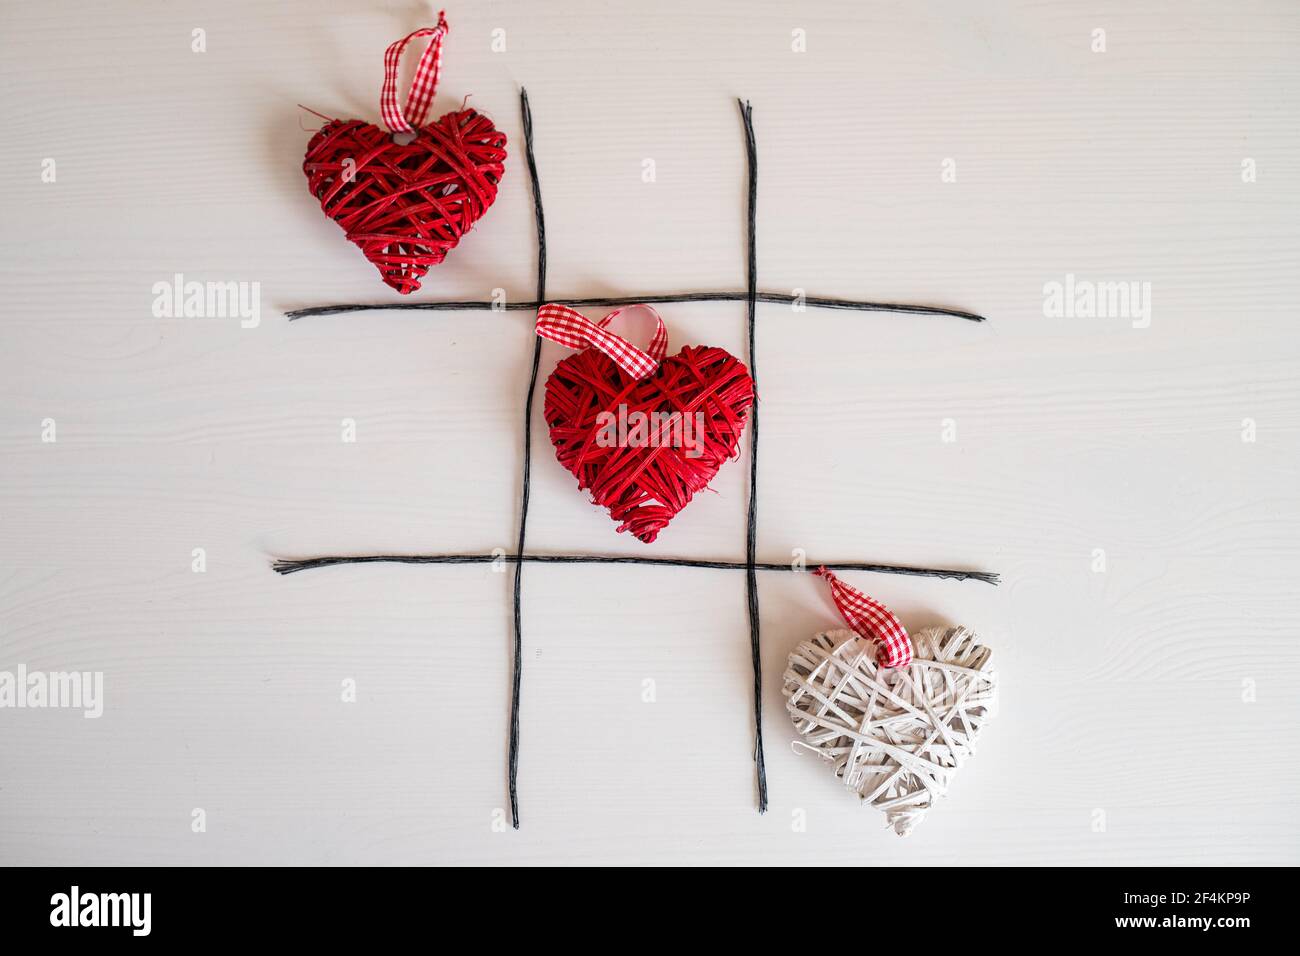 Noughts and crosses game with hearts for Valentines day Stock Photo